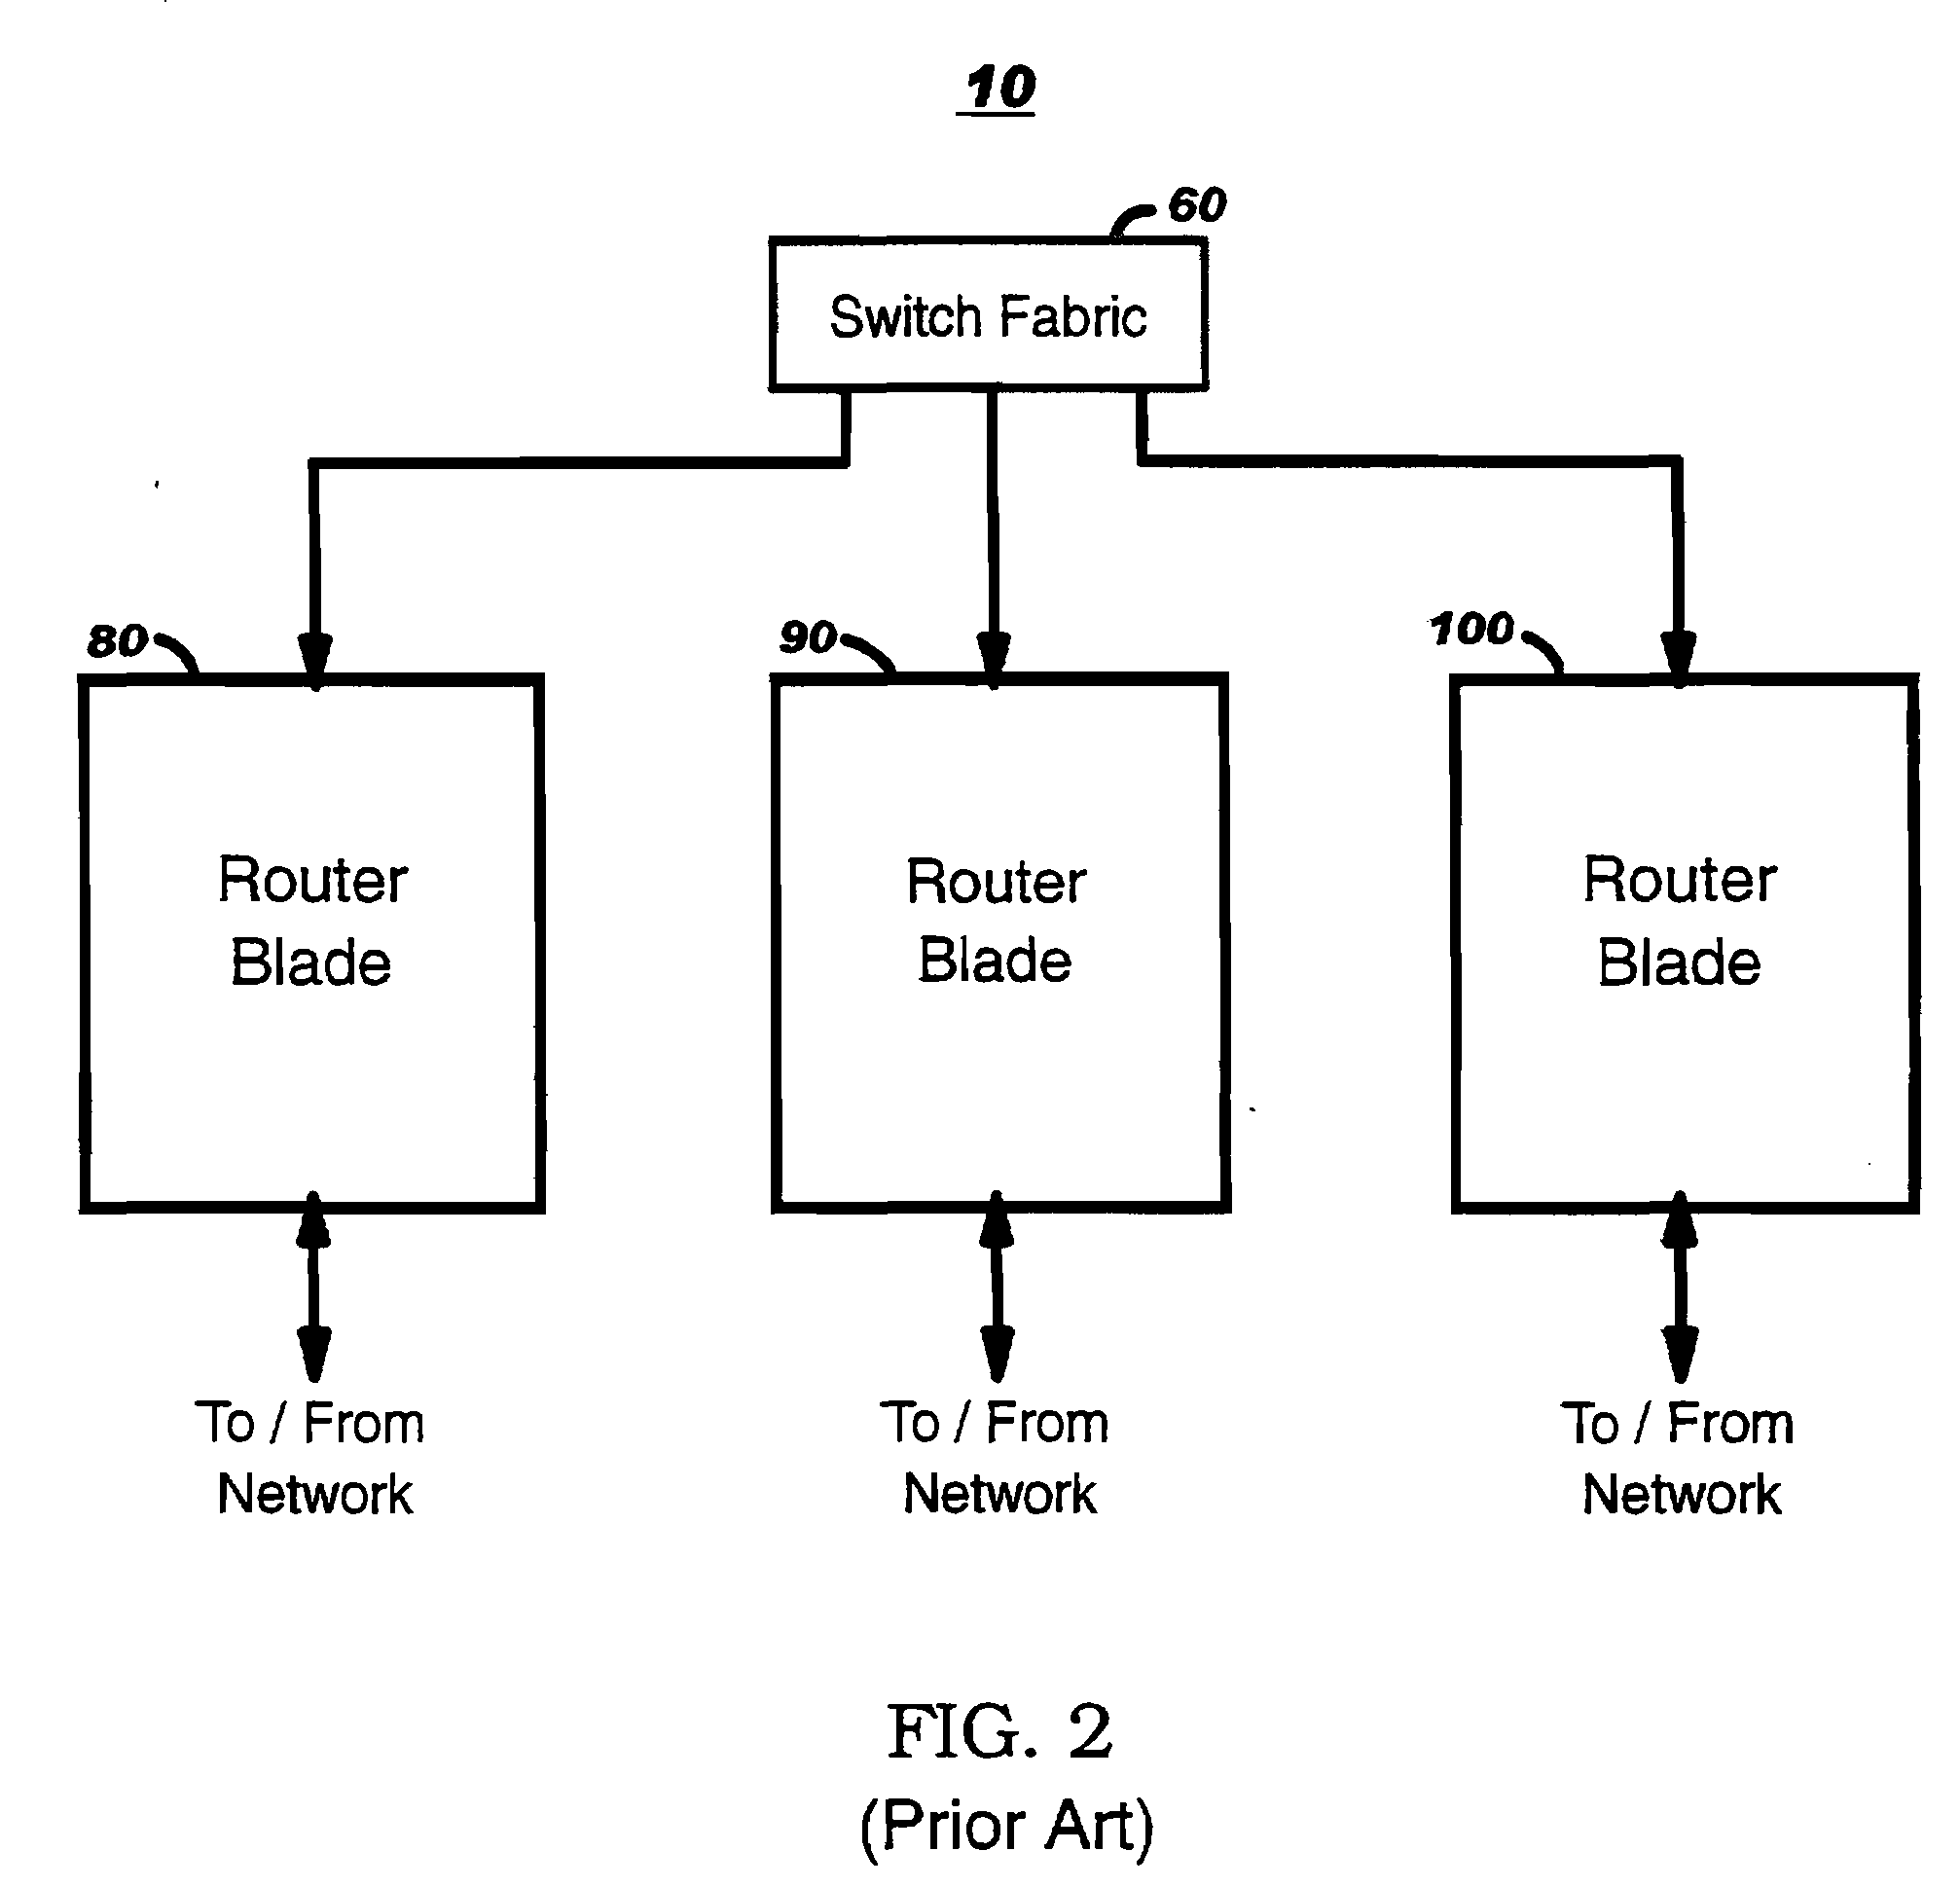 Selective header field dispatch in a network processing system